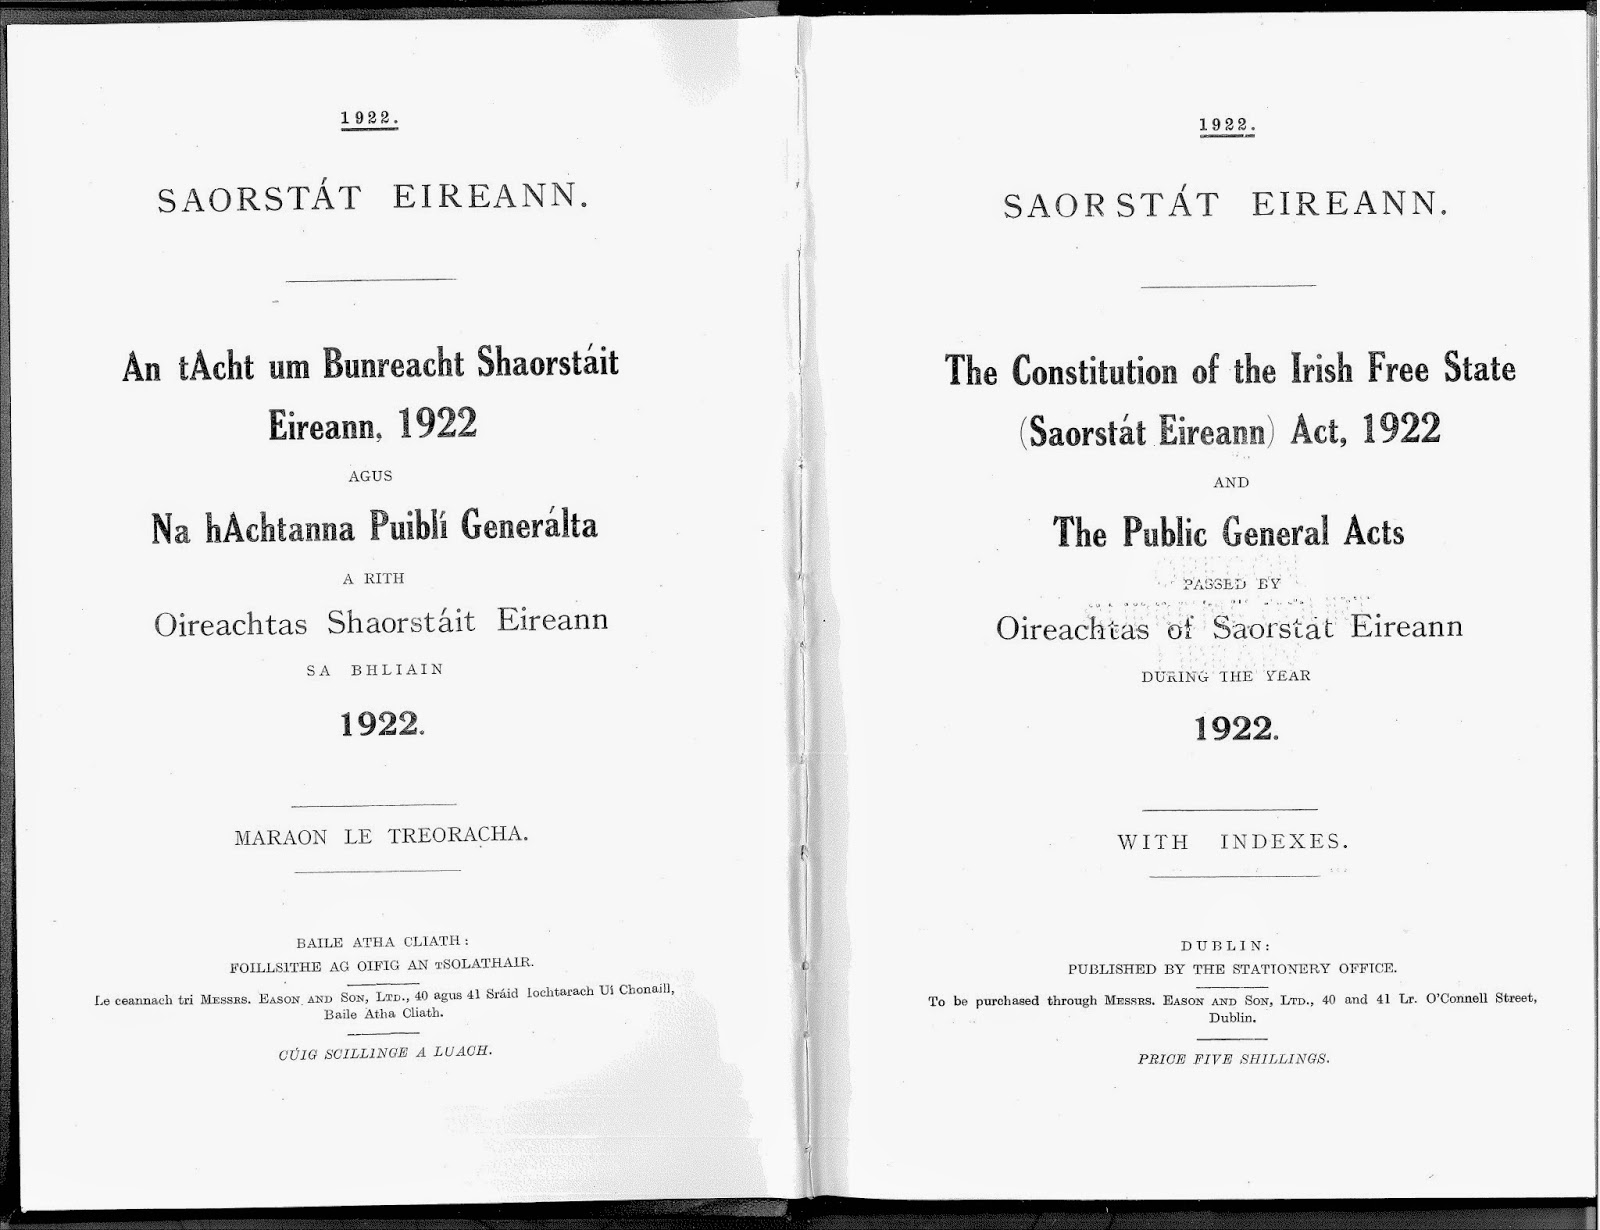 'The Free State of Ireland' was introduced in 1922